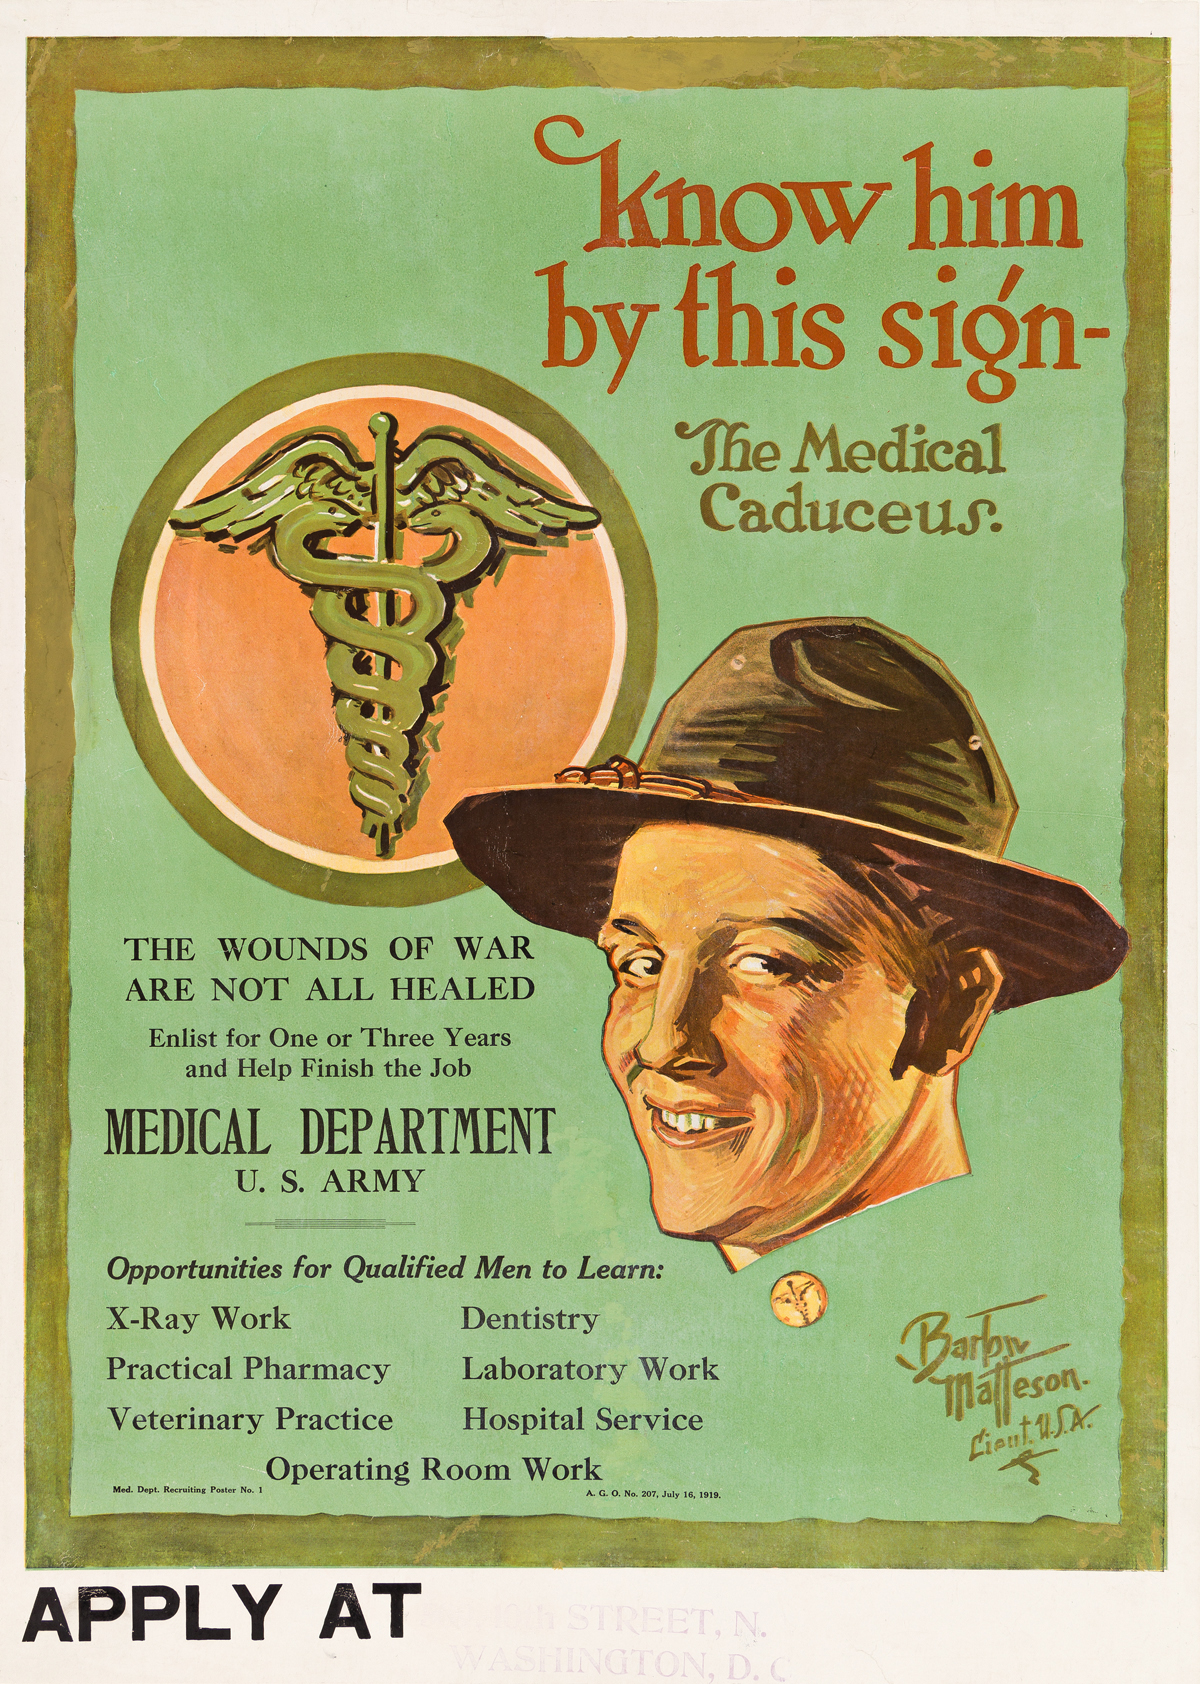 BARTOW MATTESON (1894-1984).  KNOW HIM BY THIS SIGN - THE MEDICAL CADUCEUS. 1919. 28½x20¼ inches, 72¼x51½ cm.